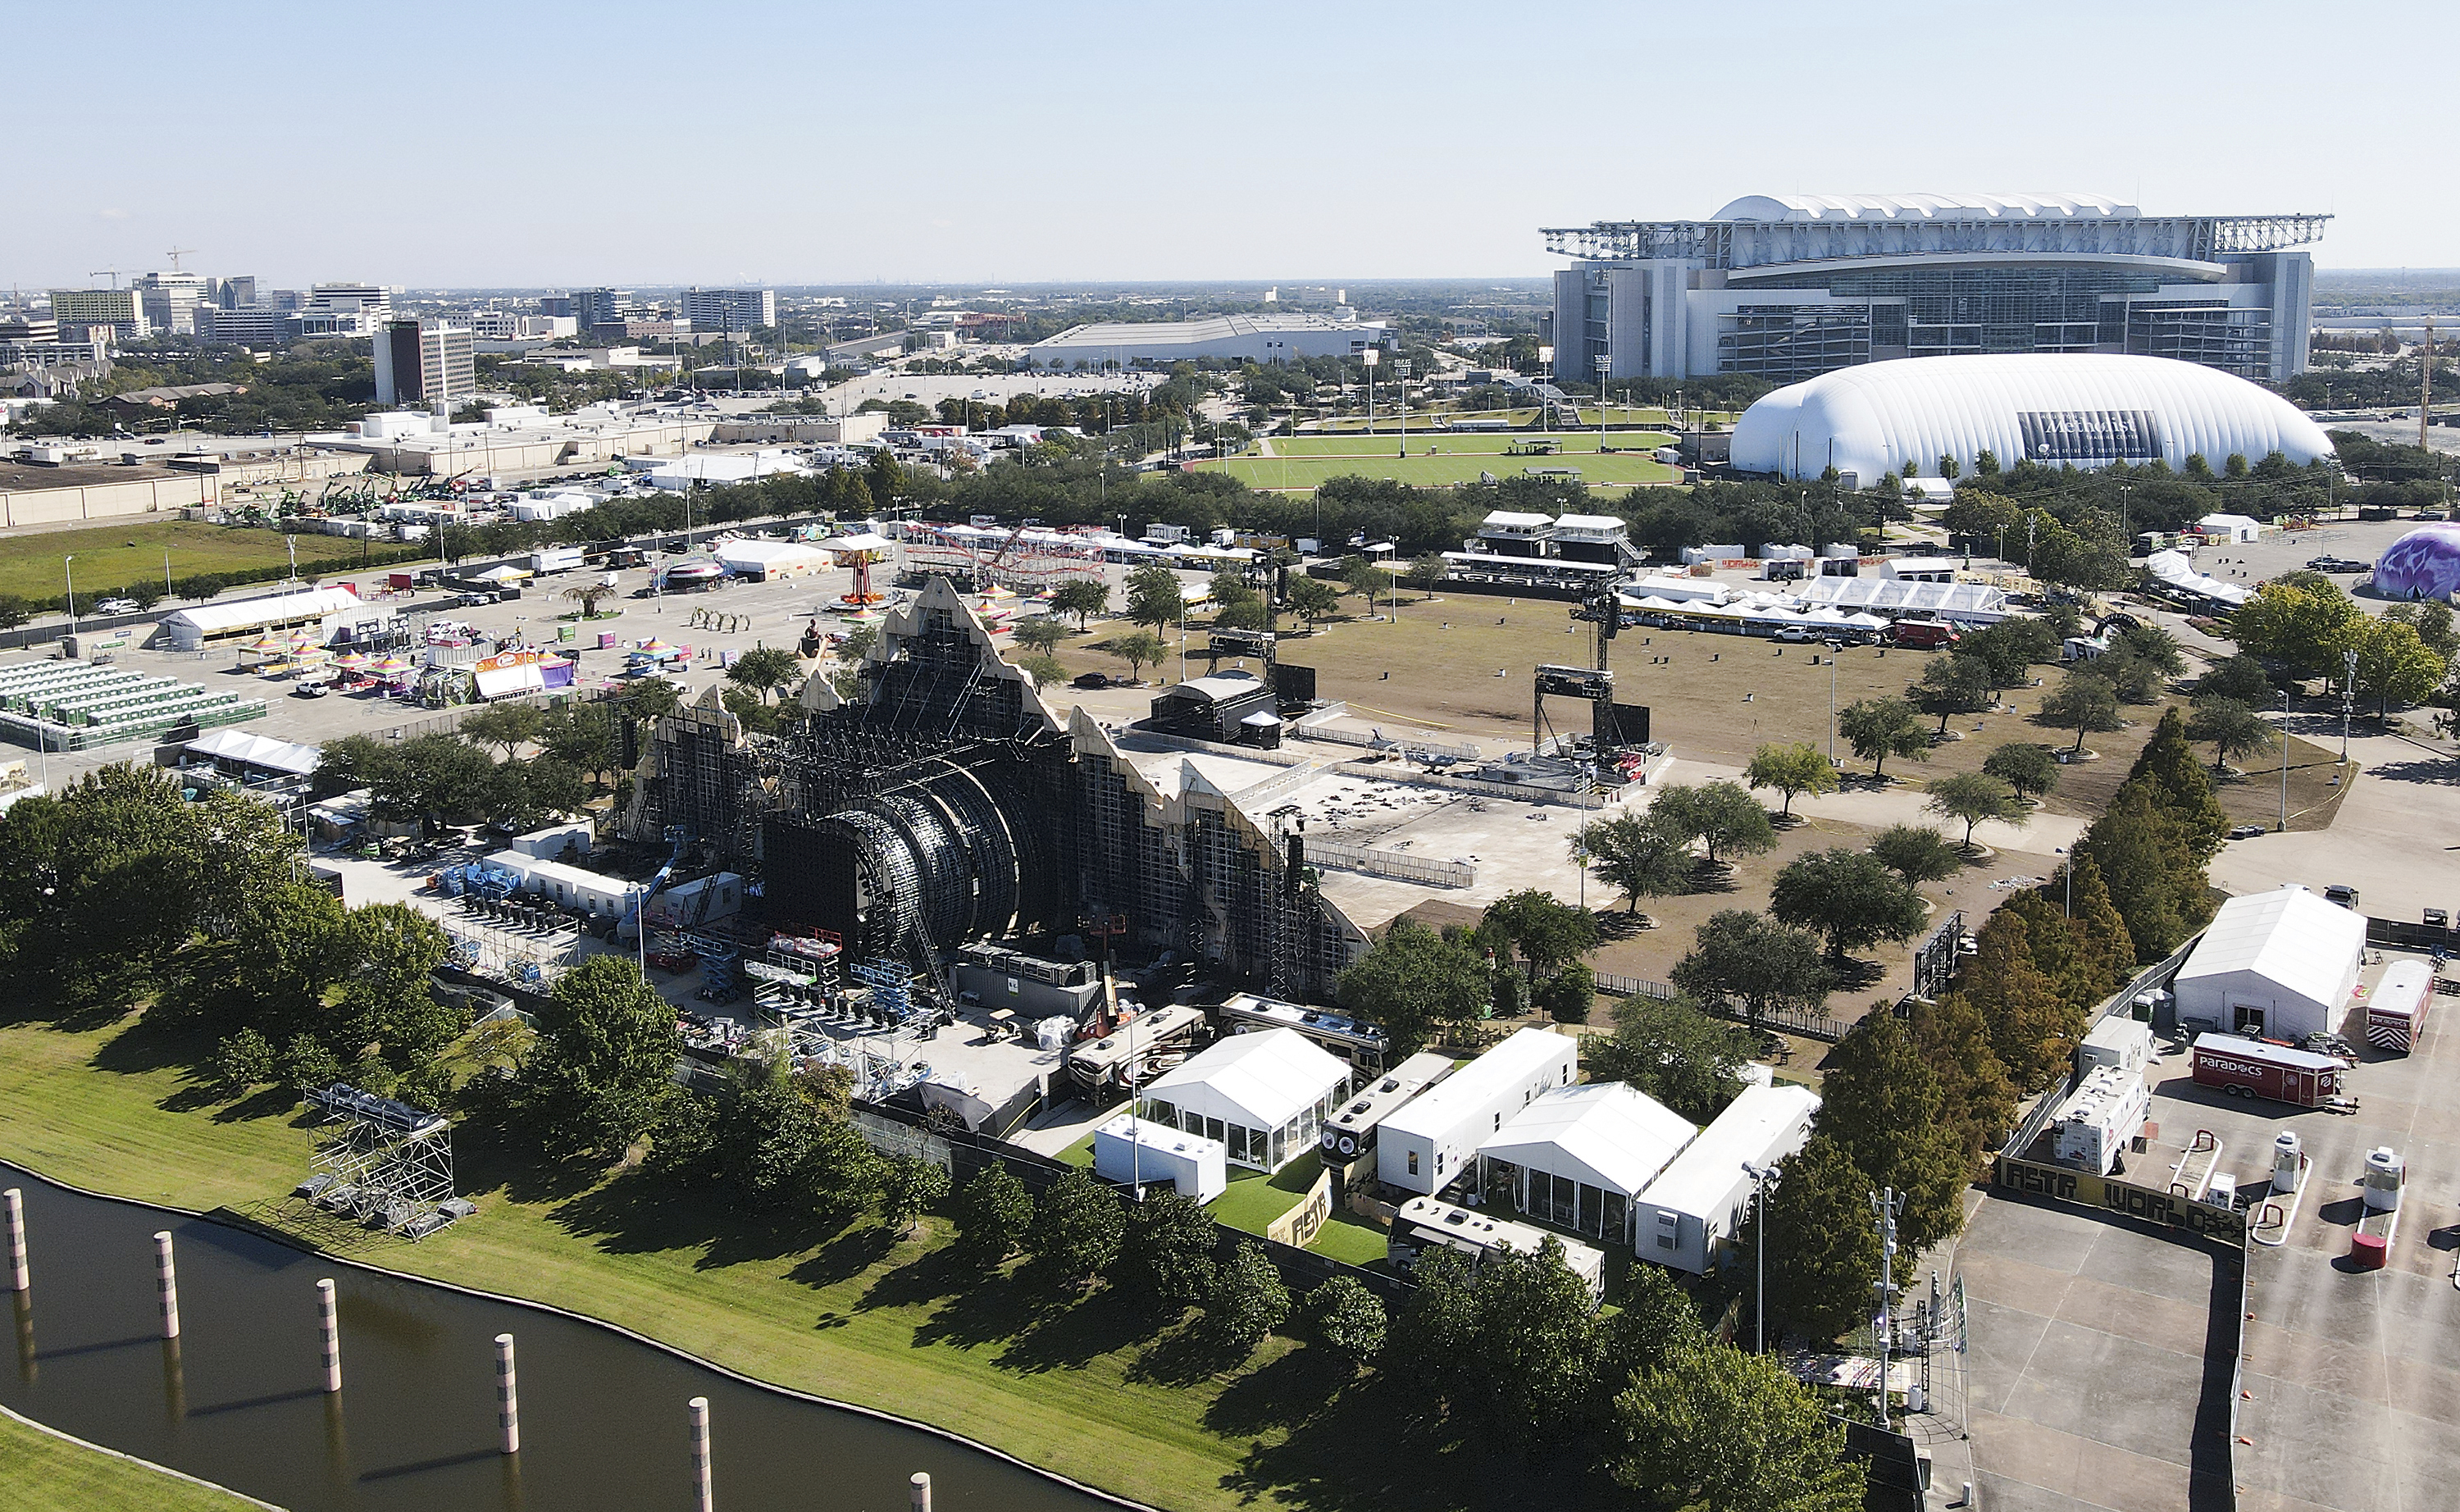 The 10 people who lost their lives in a massive crowd surge at the Astroworld music festival in Houston died from compression asphyxia, officials announced. 